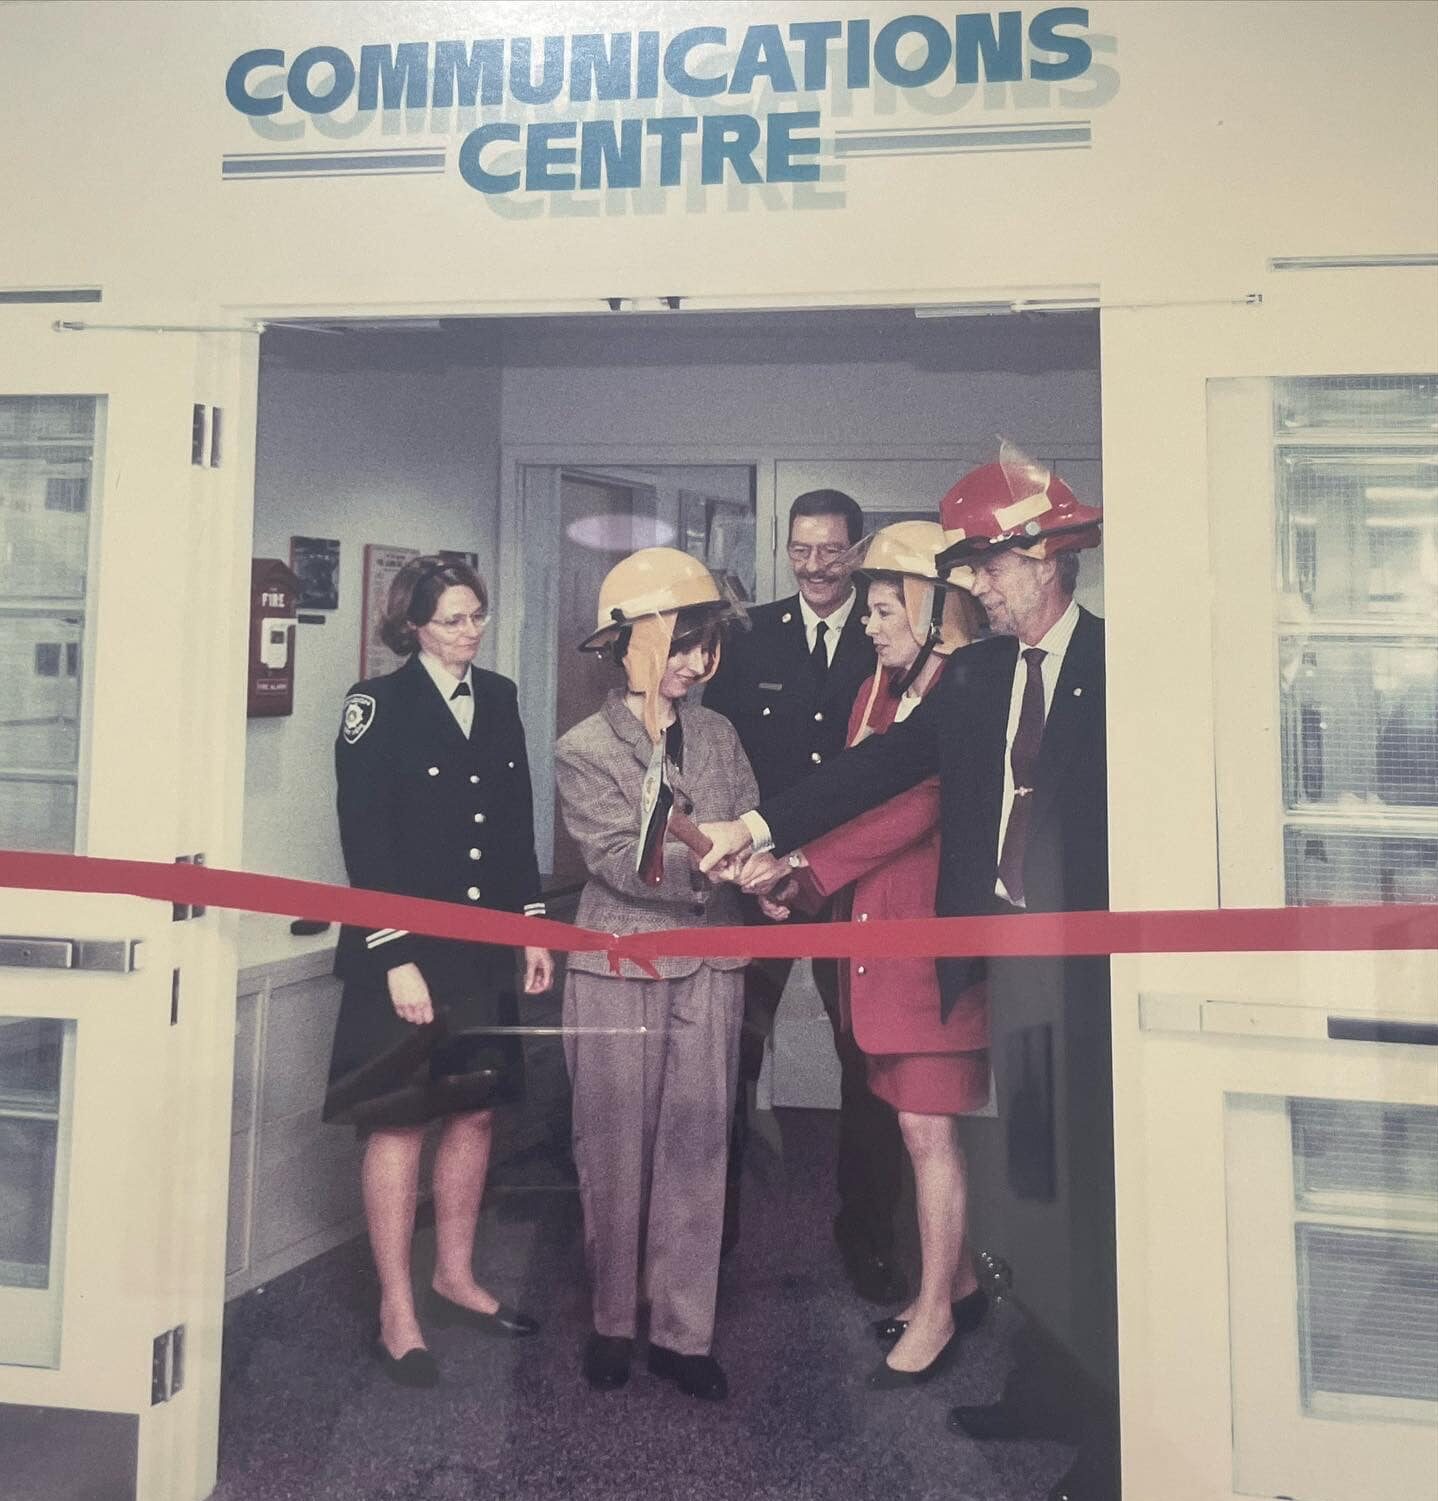 Official launch of computer-aided dispatch system in London, Ontario. (L-R Supervisor of Communications Deborah McCutcheon, Deputy Mayor Anne Marie Decicco, Fire Chief Designate Dave Hodgins, Mayor Dianne Haskett, Fire Chief Gary Weese (ret.))